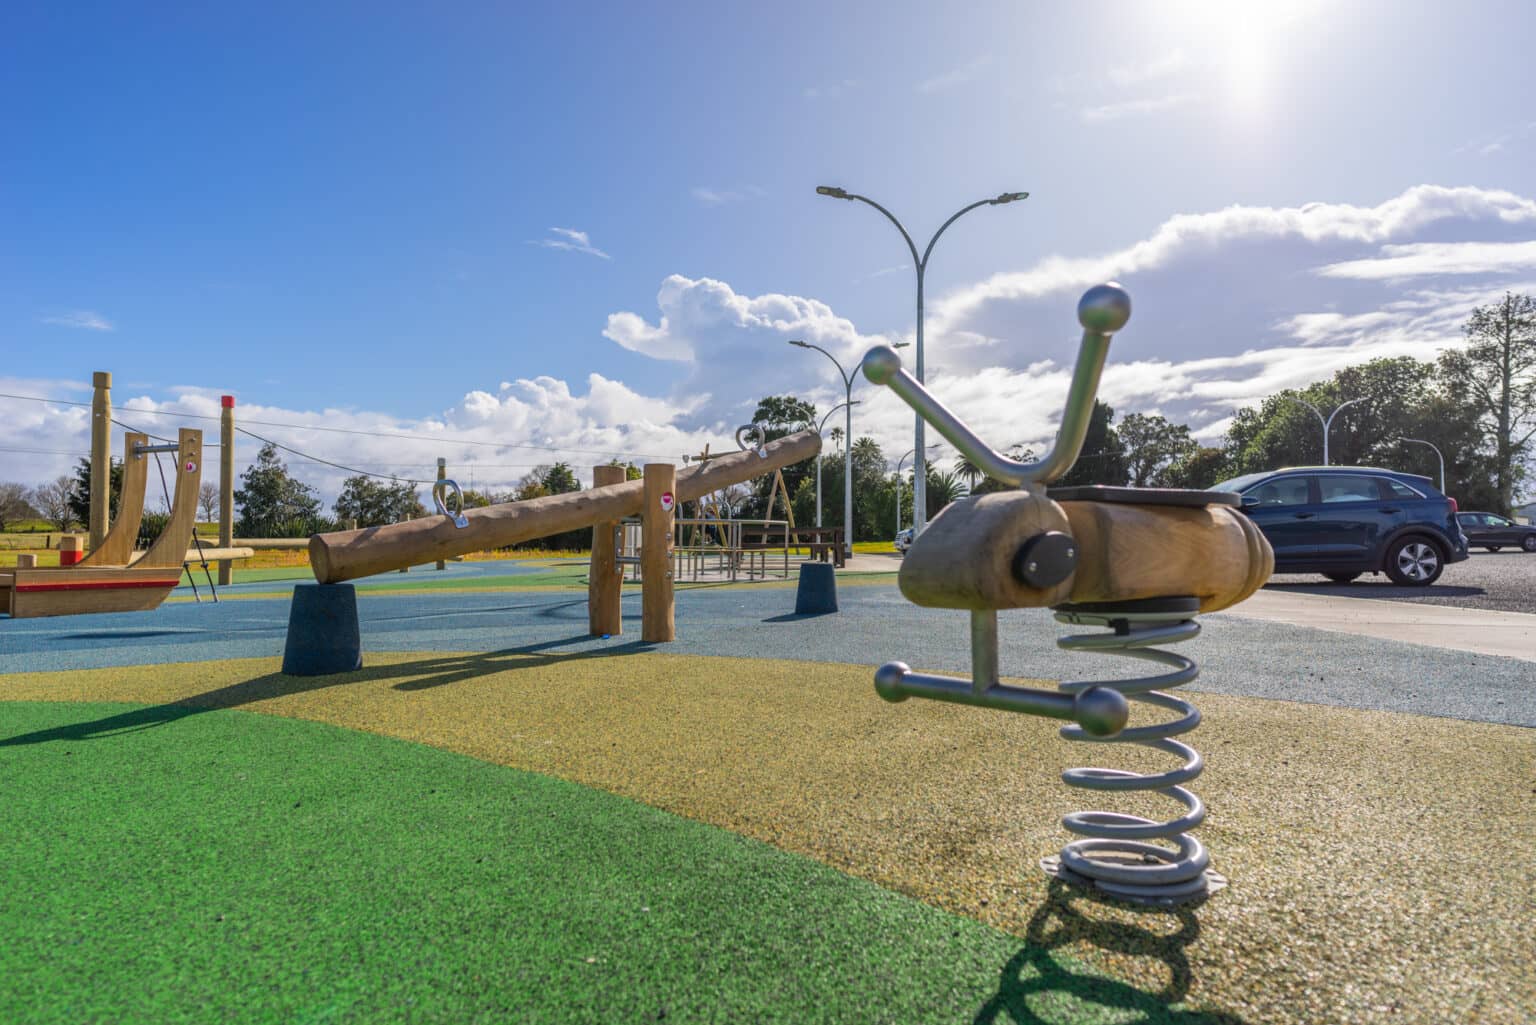 Play equipment at Whitikau Reserve in Opotiki